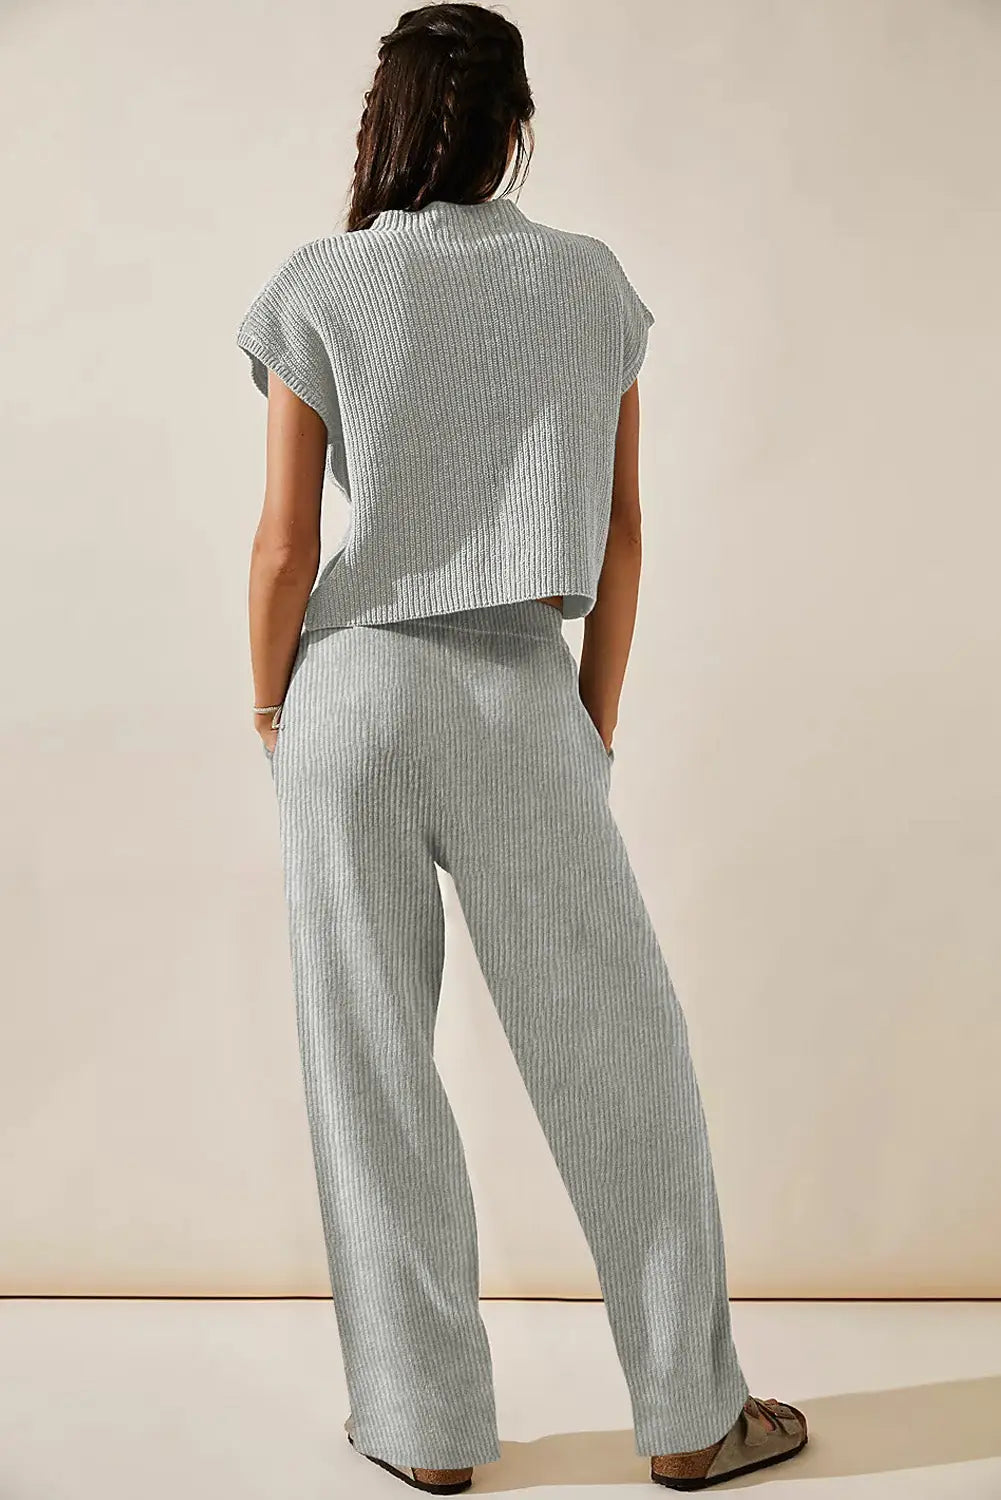 Gray knitted v neck sweater and casual pants set - loungewear